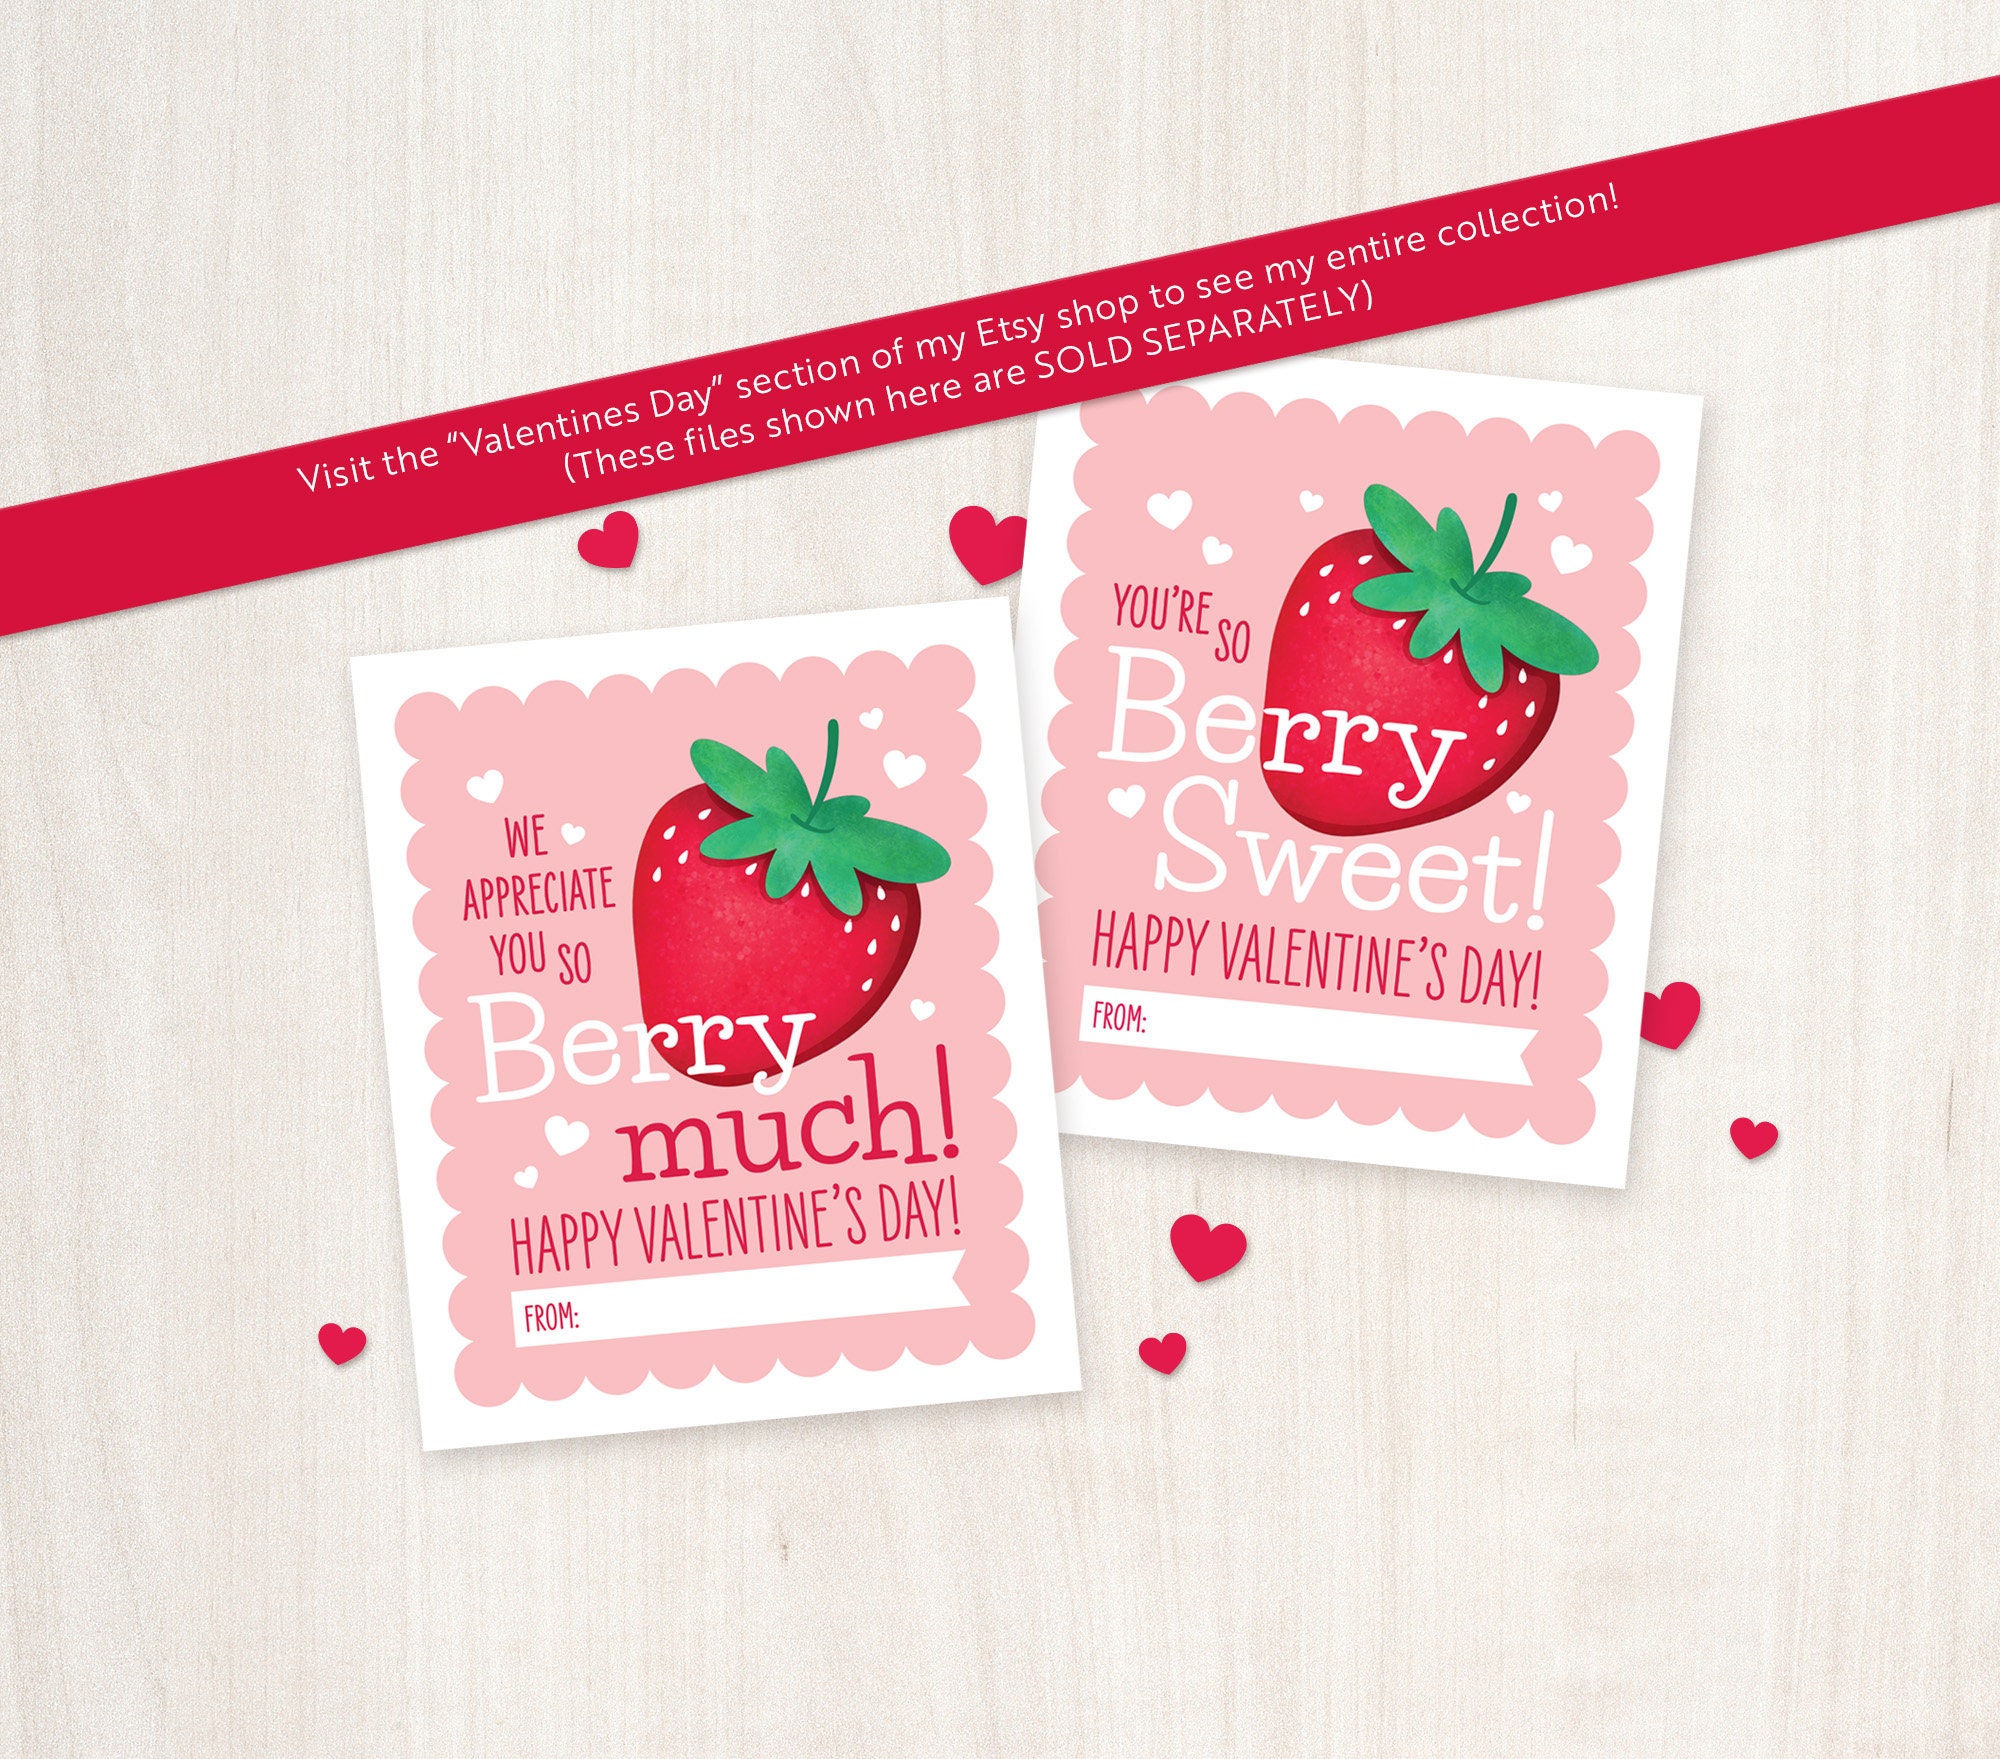 Strawberry Smencils® with Valentine's Day Cards (52 ct